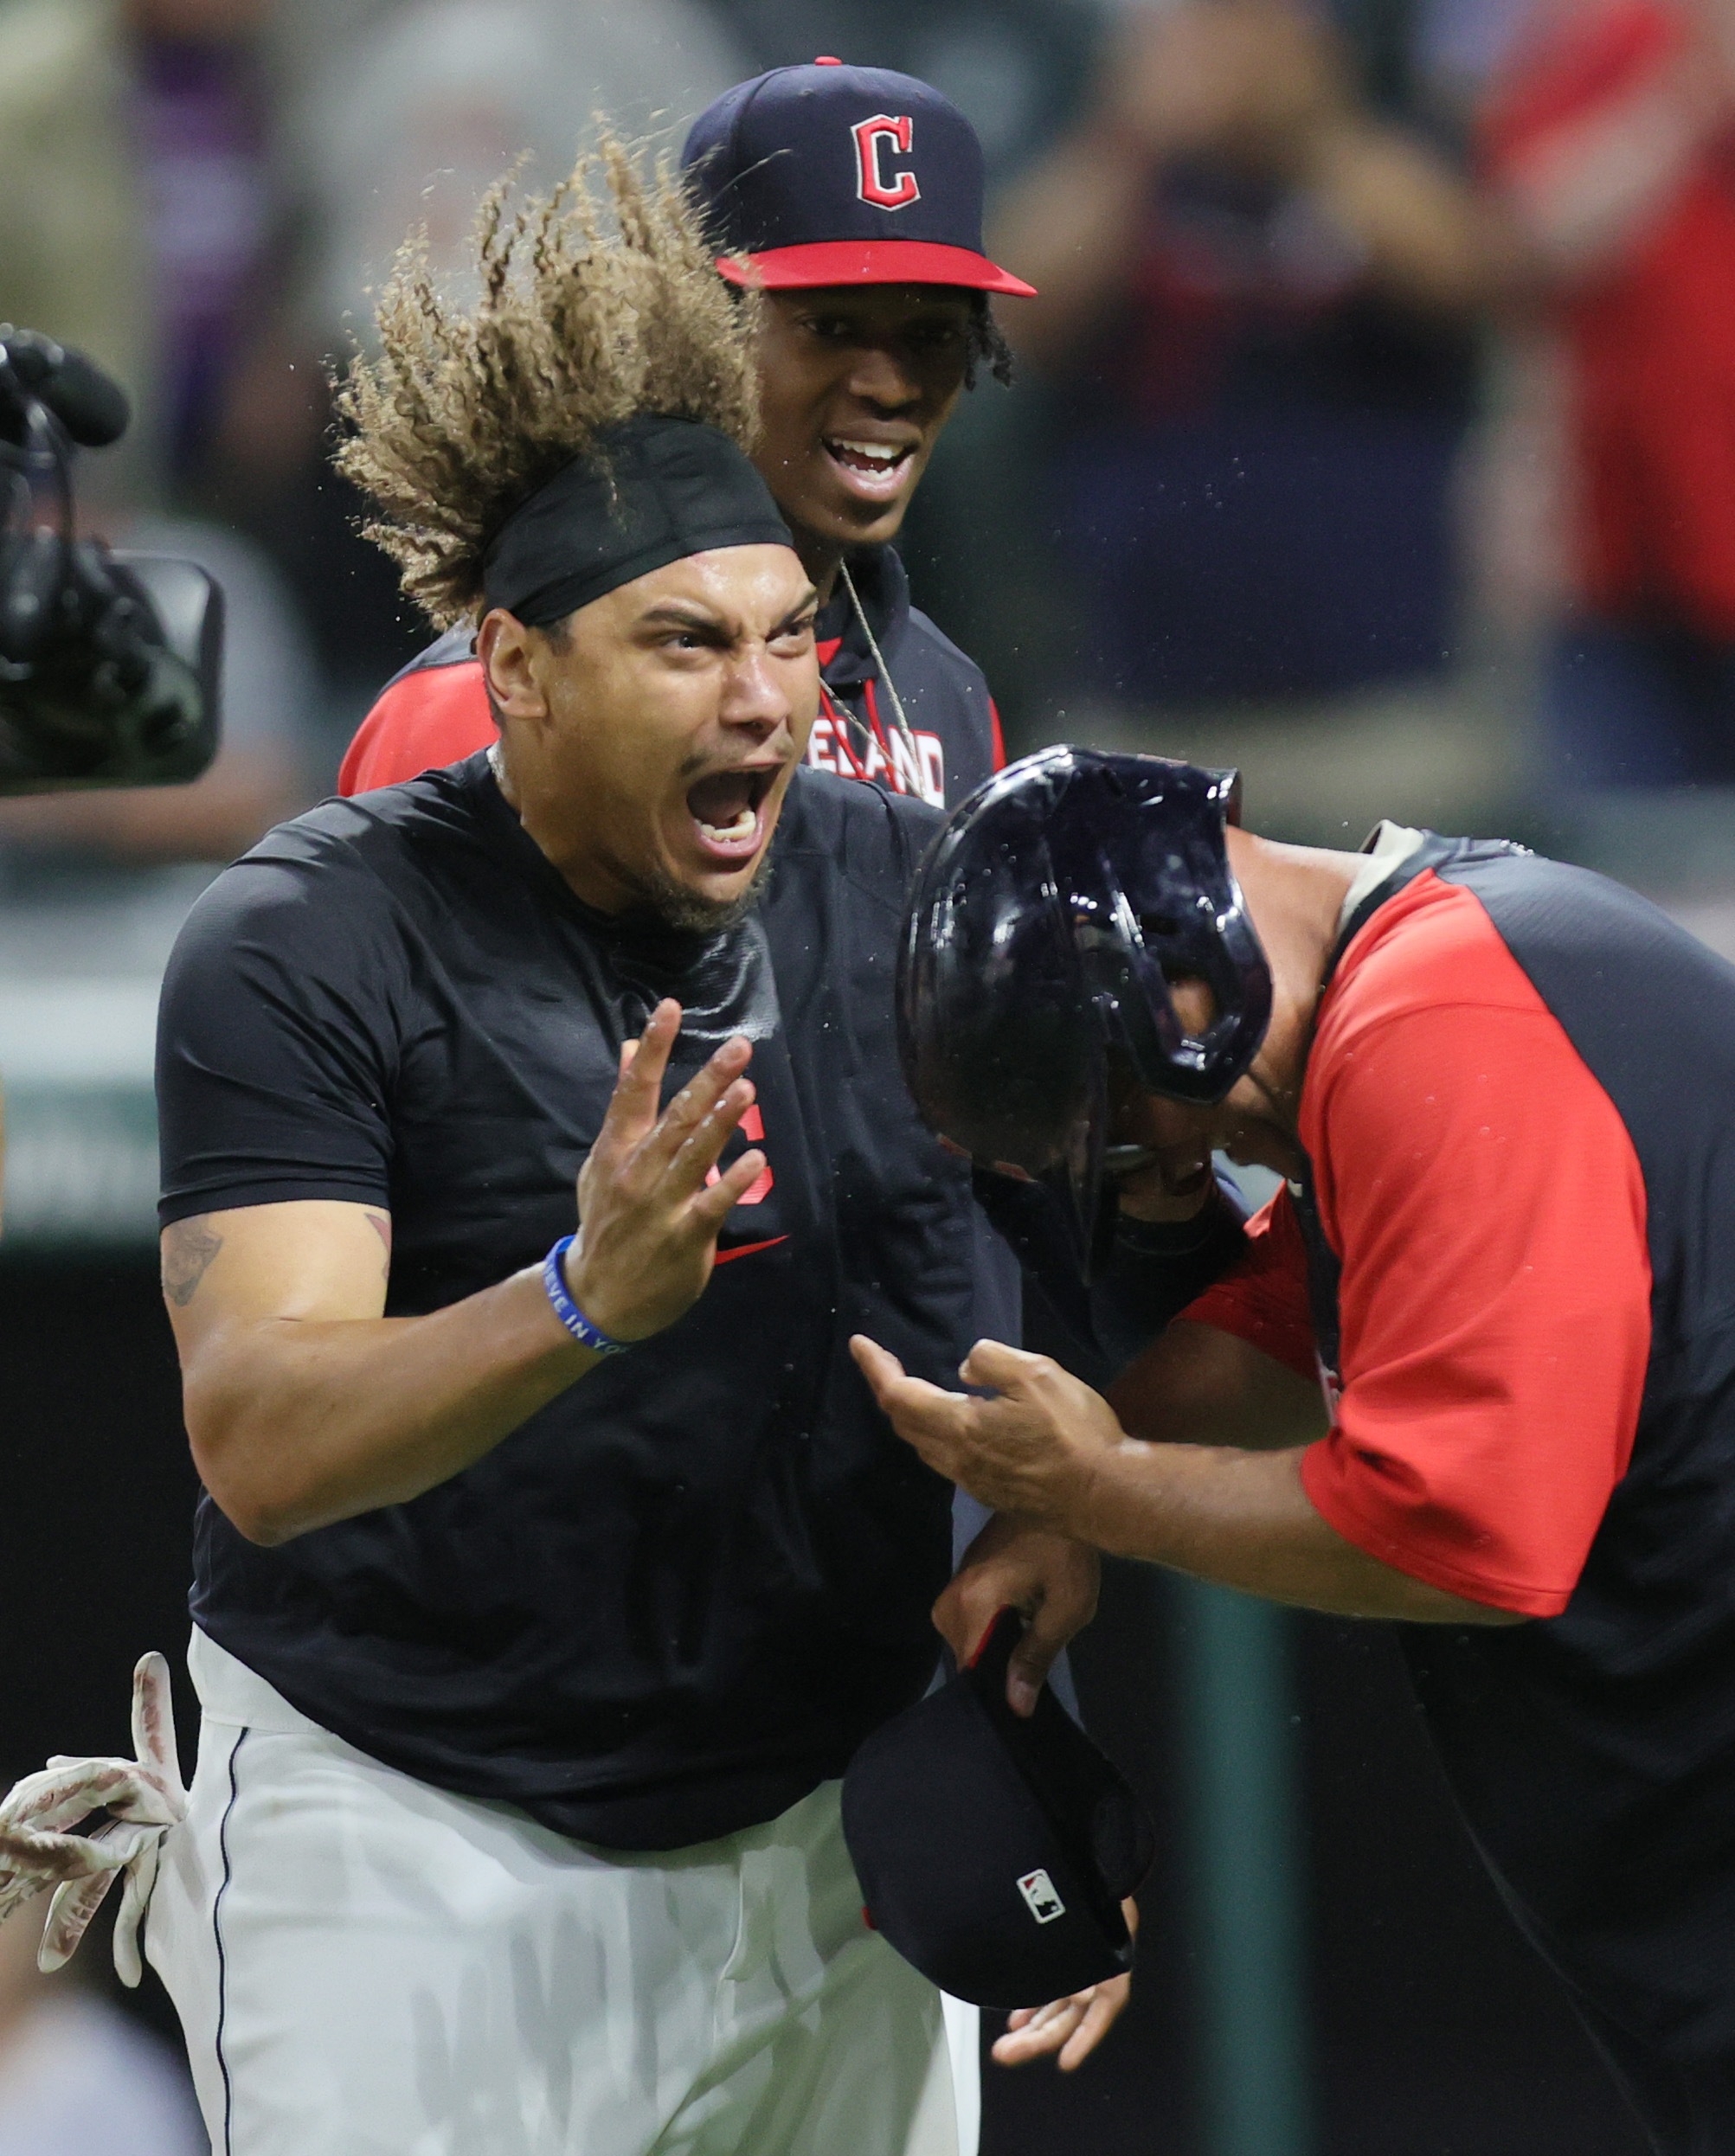 Josh Naylor Game 2.0' raised the stakes for Guardians with a walk-off win,  headbutt celebration vs. rival Twins 